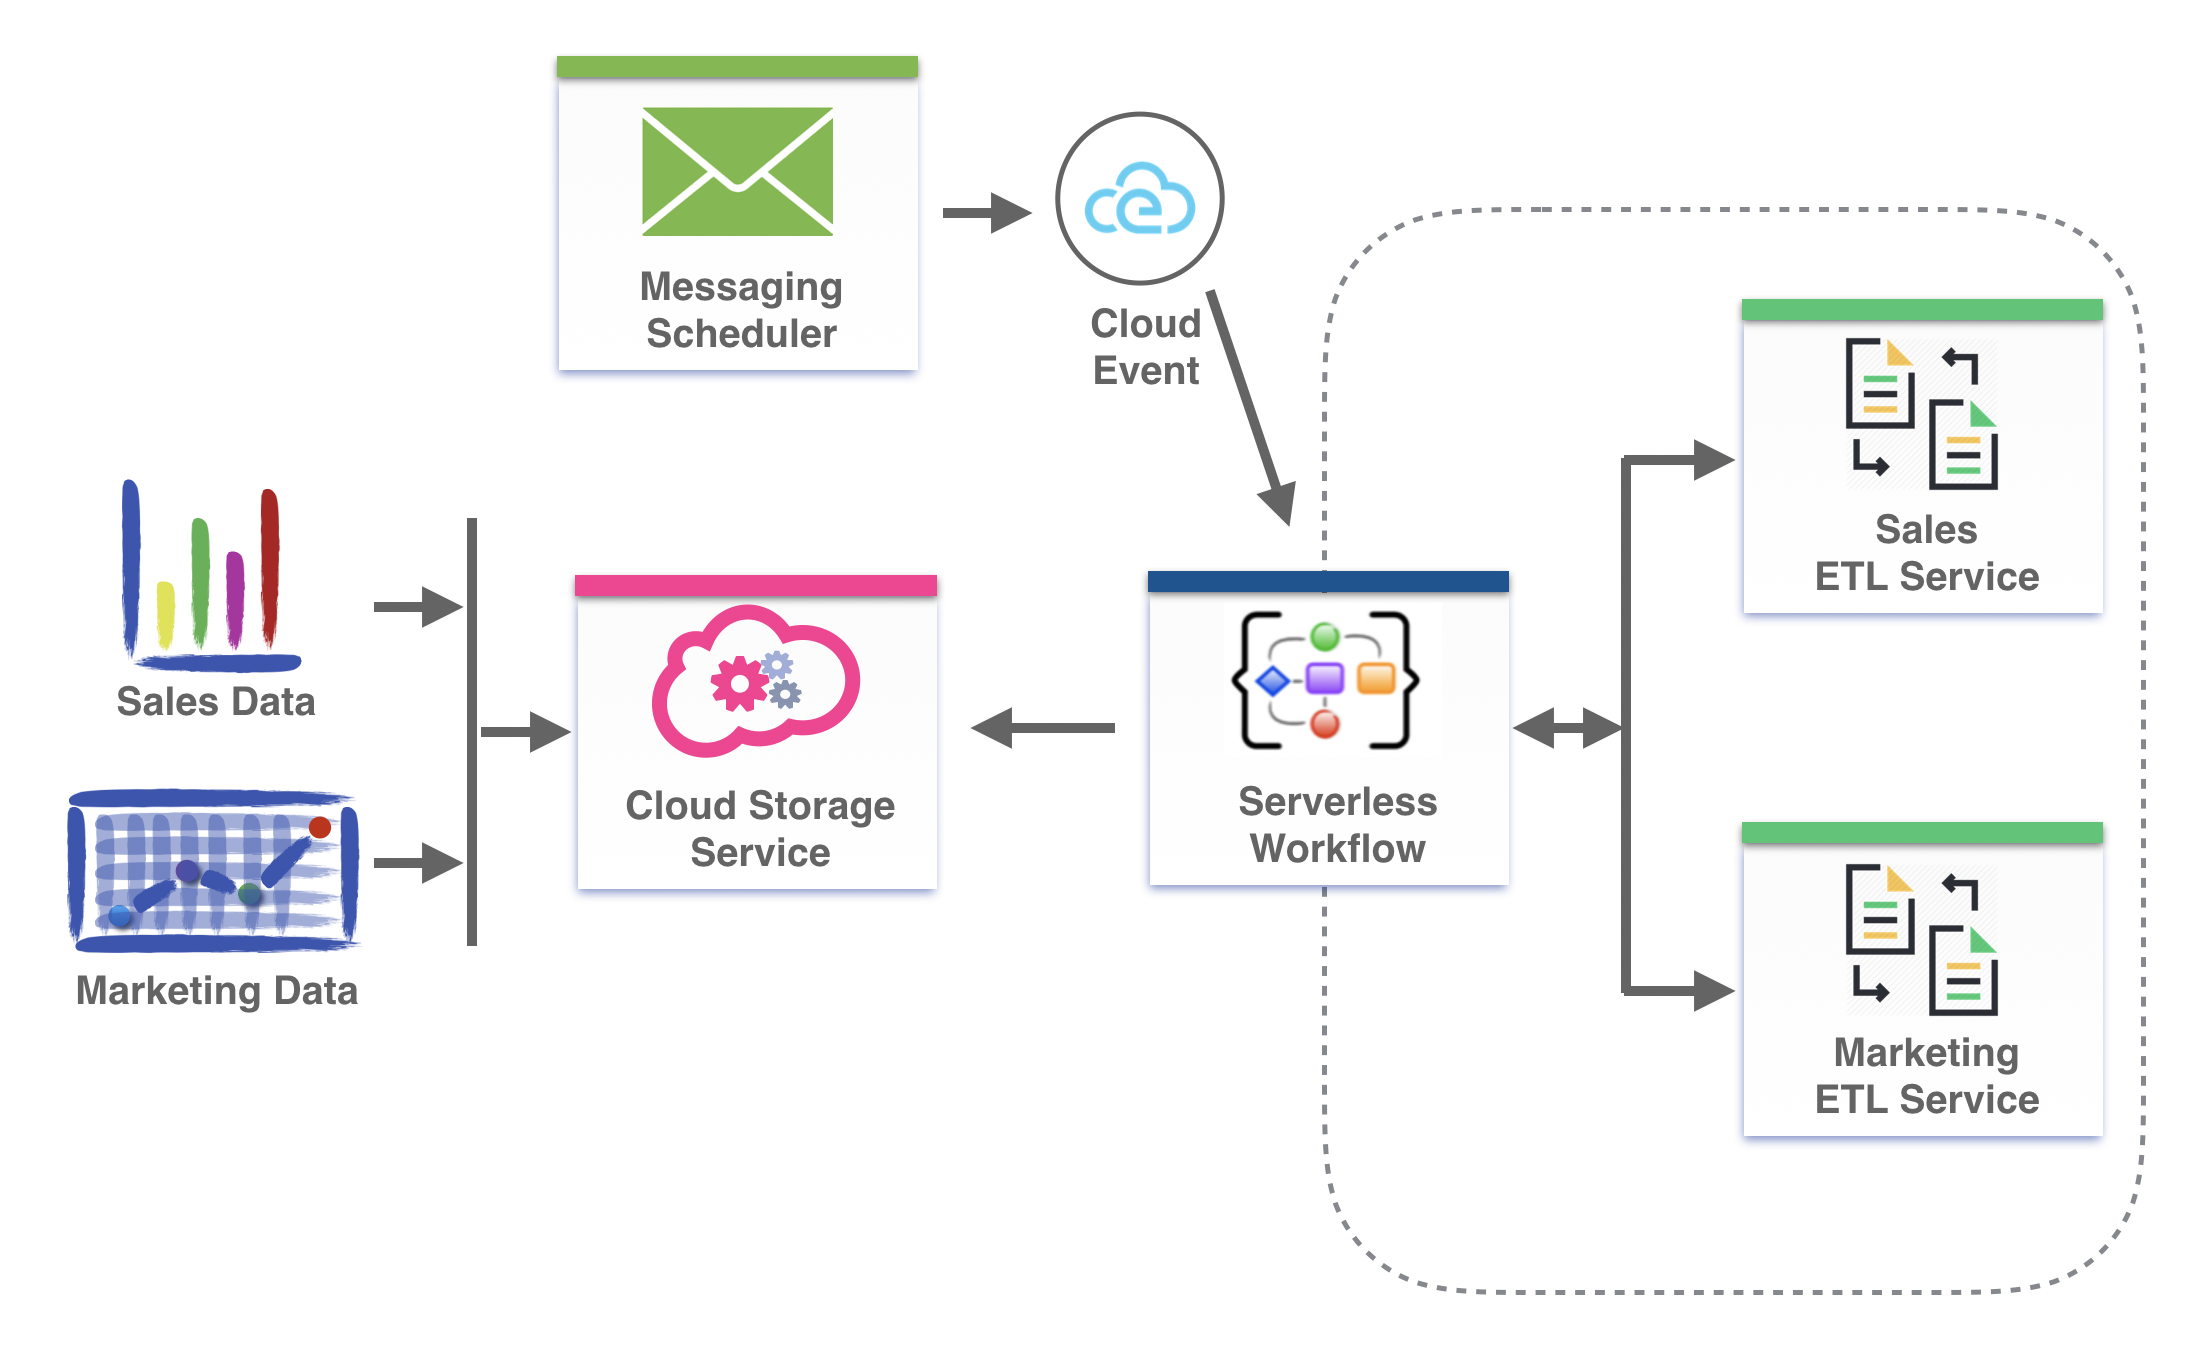 Image of Serverless Workflow orchestration for data analysis